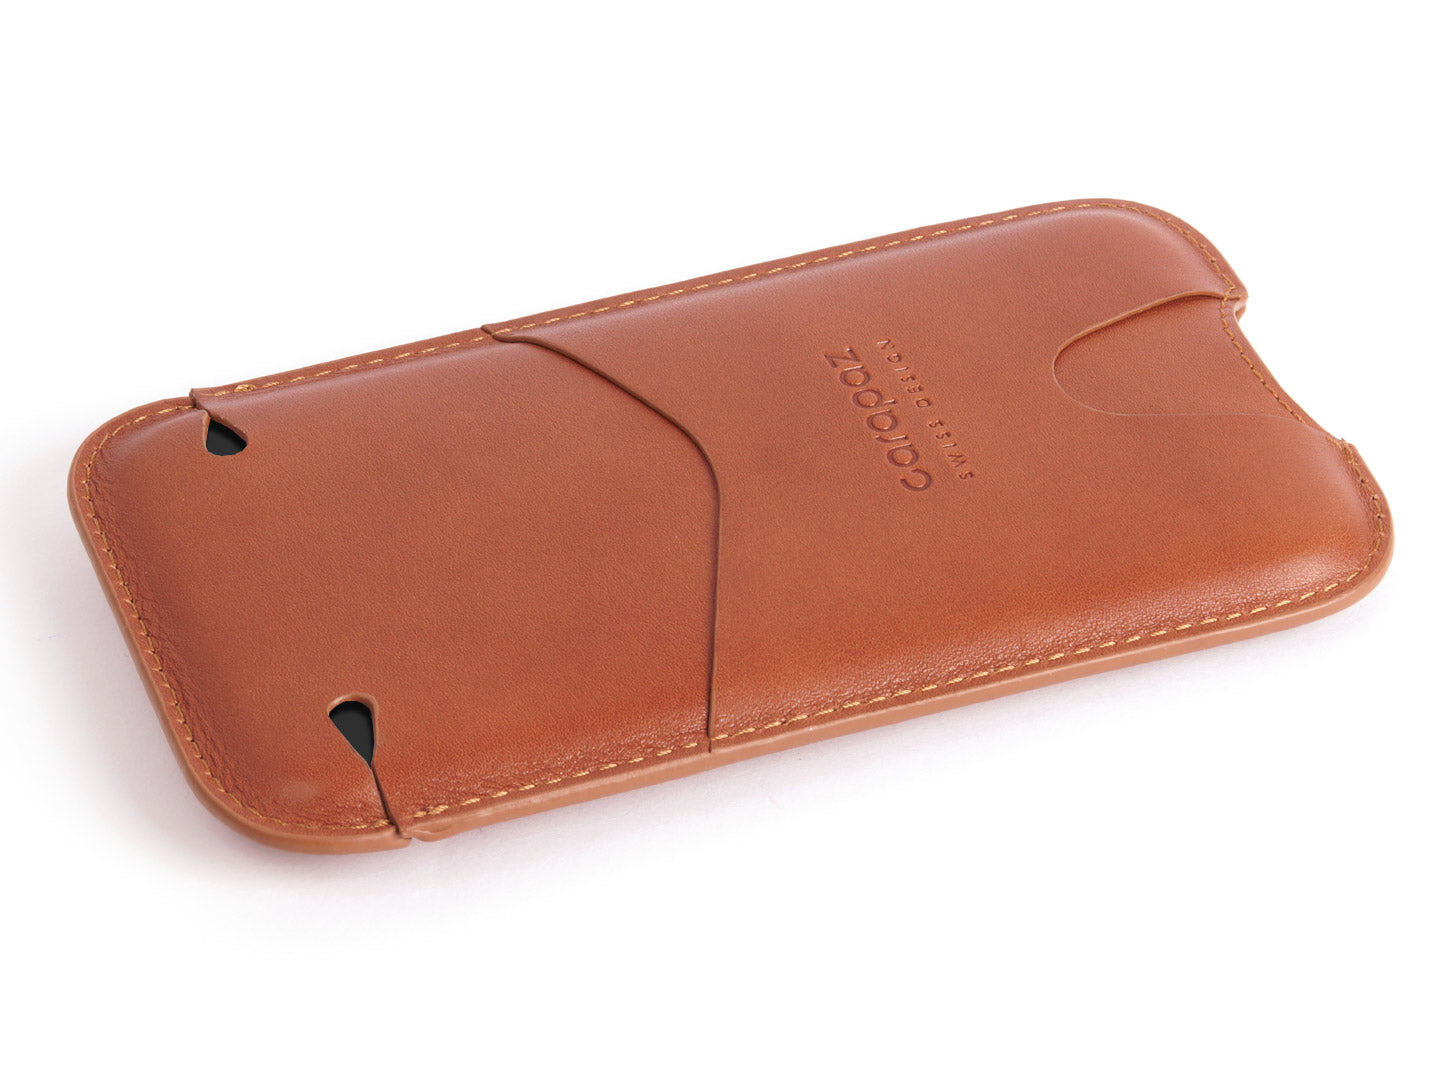 iPhone X / Xs / 11 Pro sleeve case - protecive leather pouch - tan - back - Carapaz